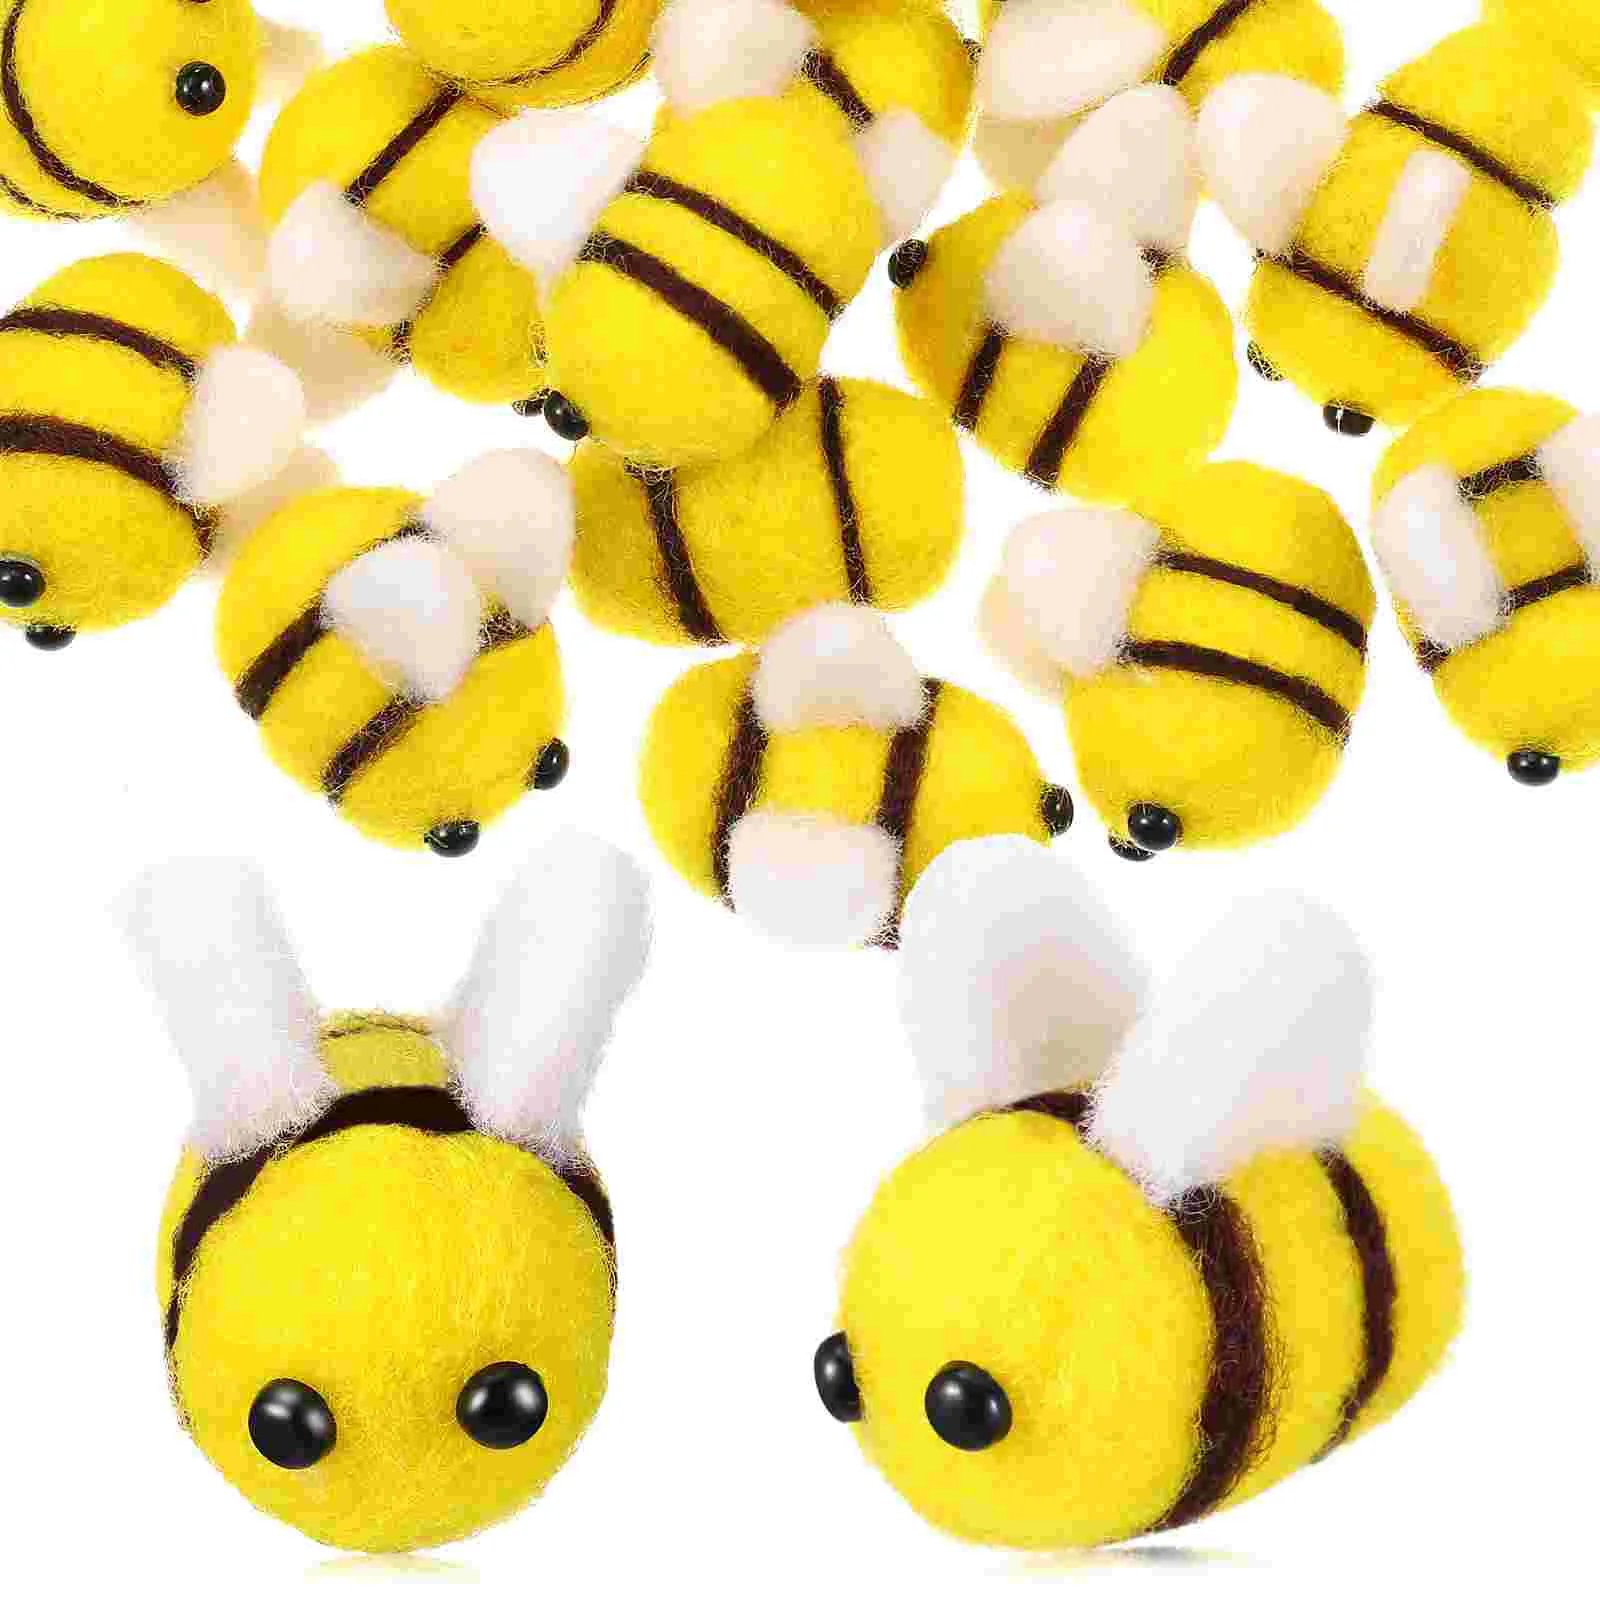 

24pcs Wool Felt Bees Crafting Supplies Bees Charms Costume Crafting Decoration